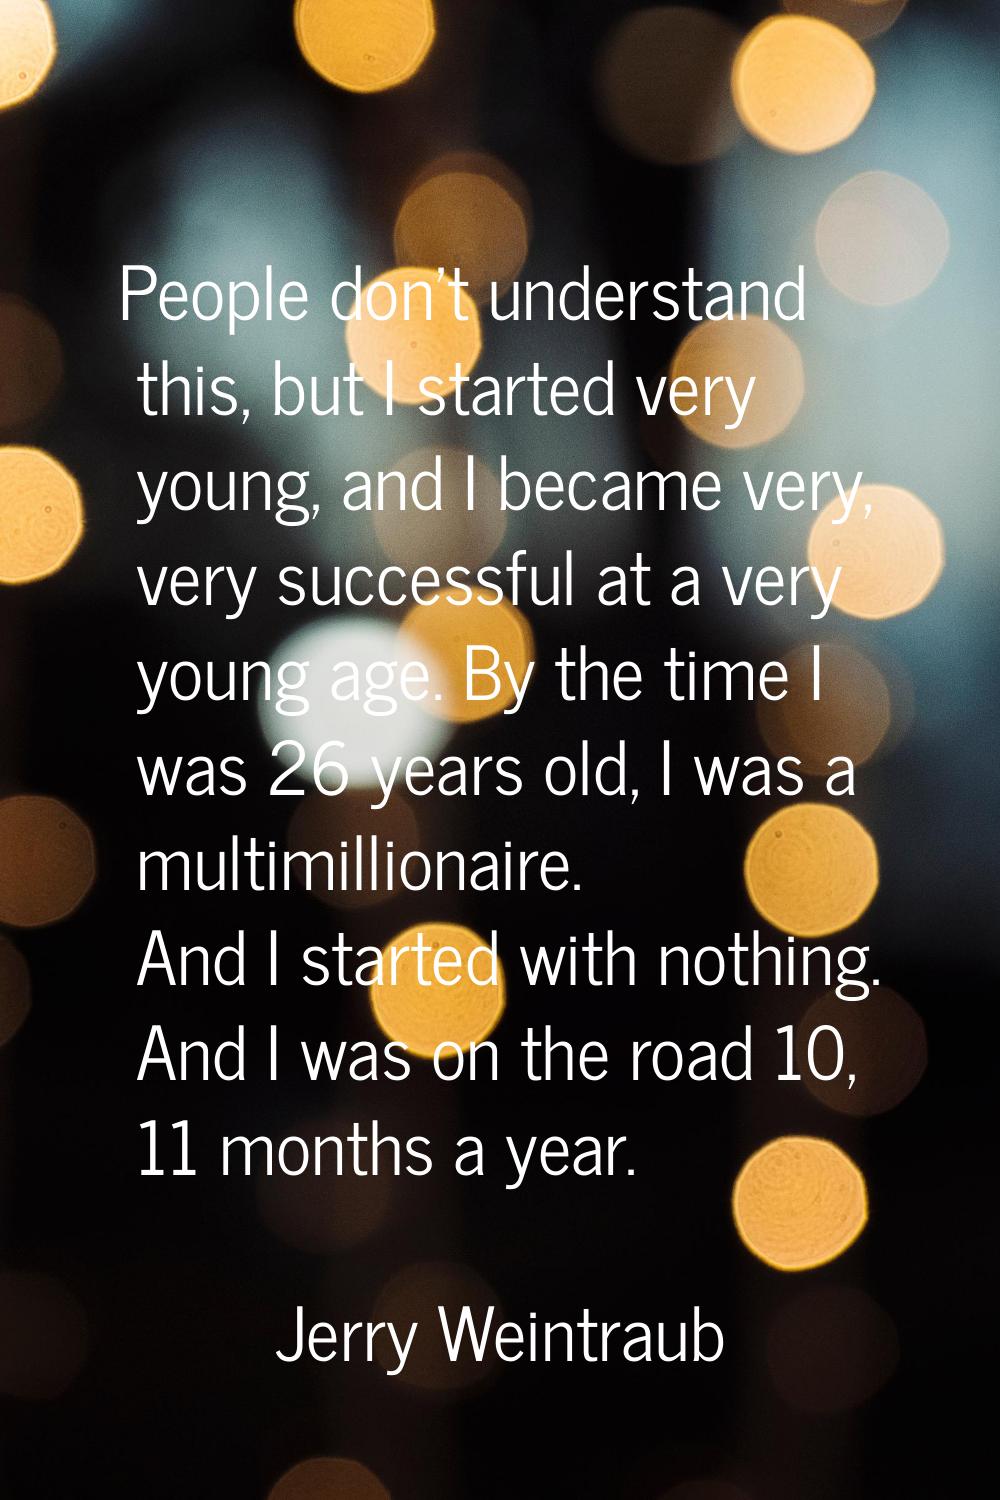 People don't understand this, but I started very young, and I became very, very successful at a ver